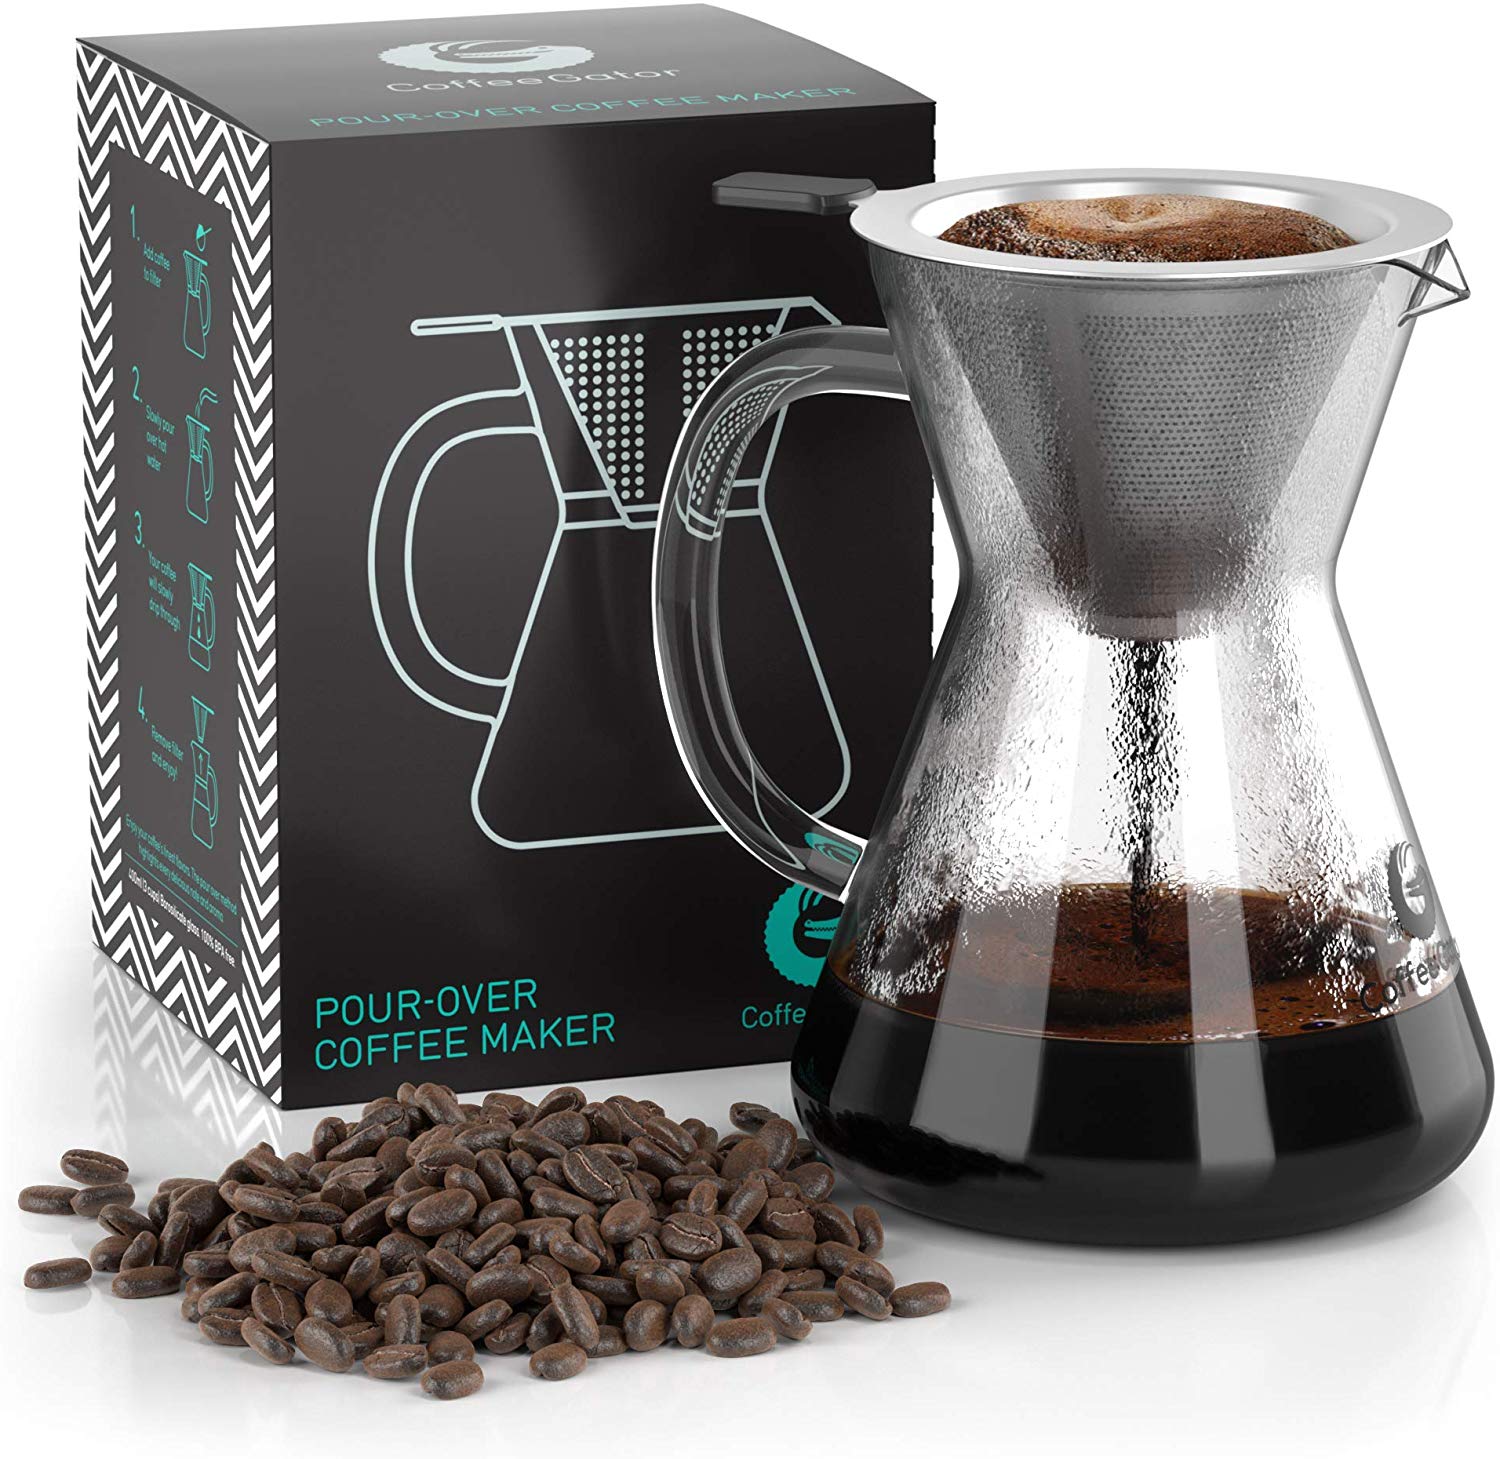 coffee dripper by Coffee Gator, its box, and coffee beans